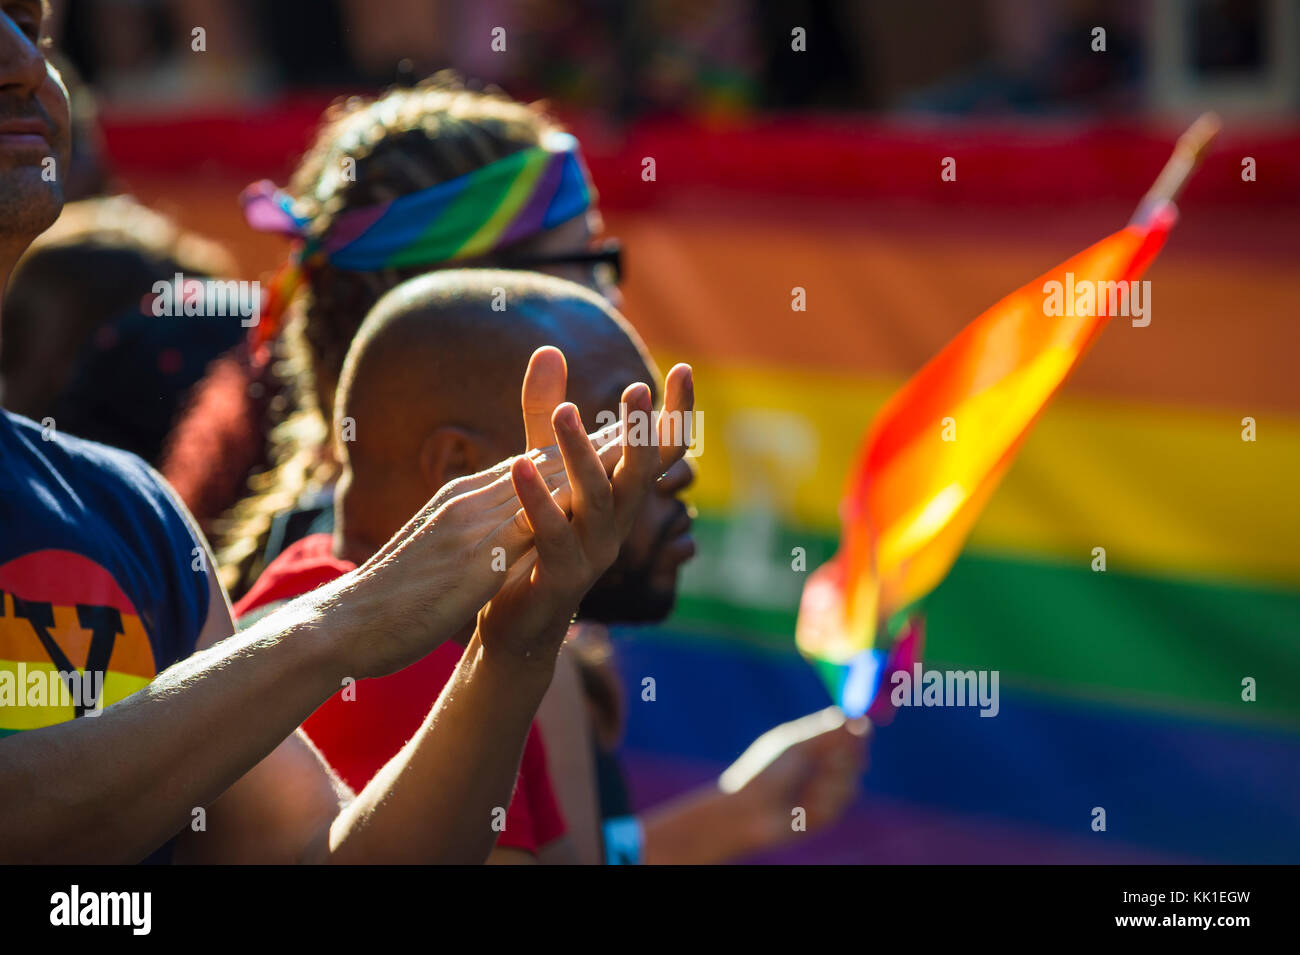 NEW YORK CITY - JUNE 25, 2017: Supporters applaud and wave rainbow flags on the sidelines of the annual Pride Parade passing through Greenwich Village Stock Photo